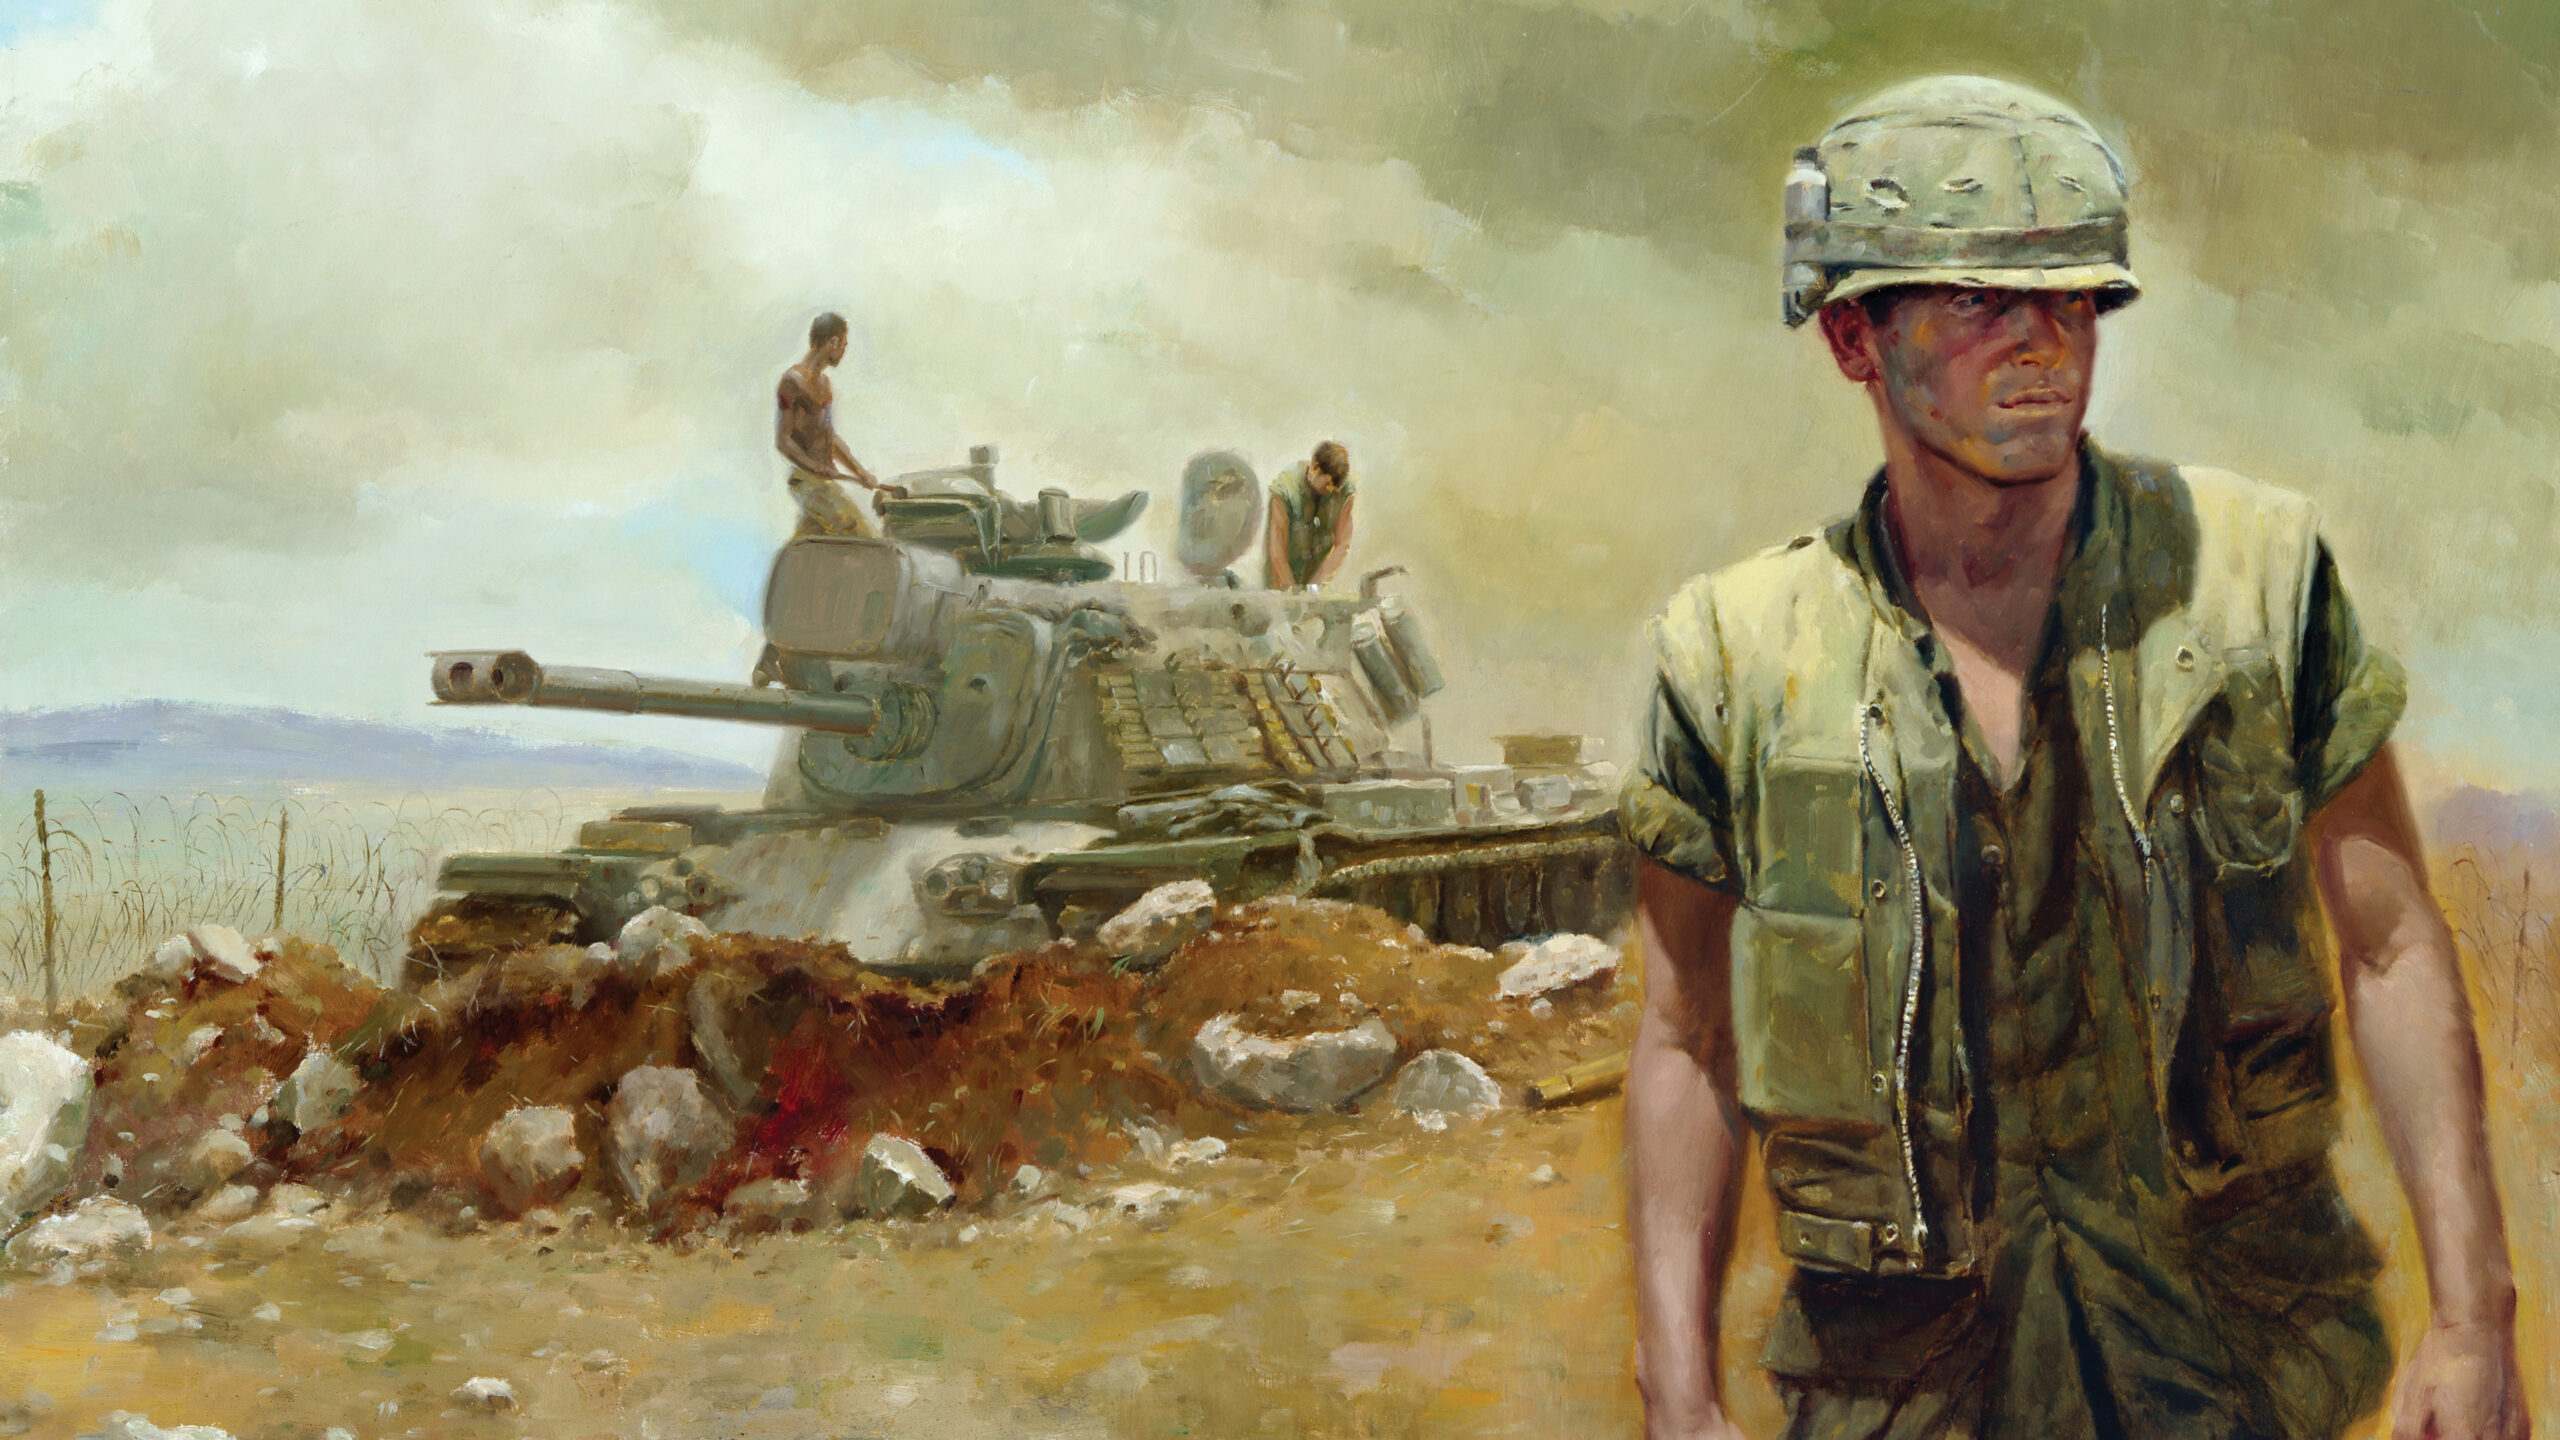 Marines maintain a M48A3 Patton tank parked in the rocky, red clay soil at Con Thien in a painting by Navy combat artist Verciell Tossey. The outpost was an anchor point in the defense of the northern border of South Vietnam.